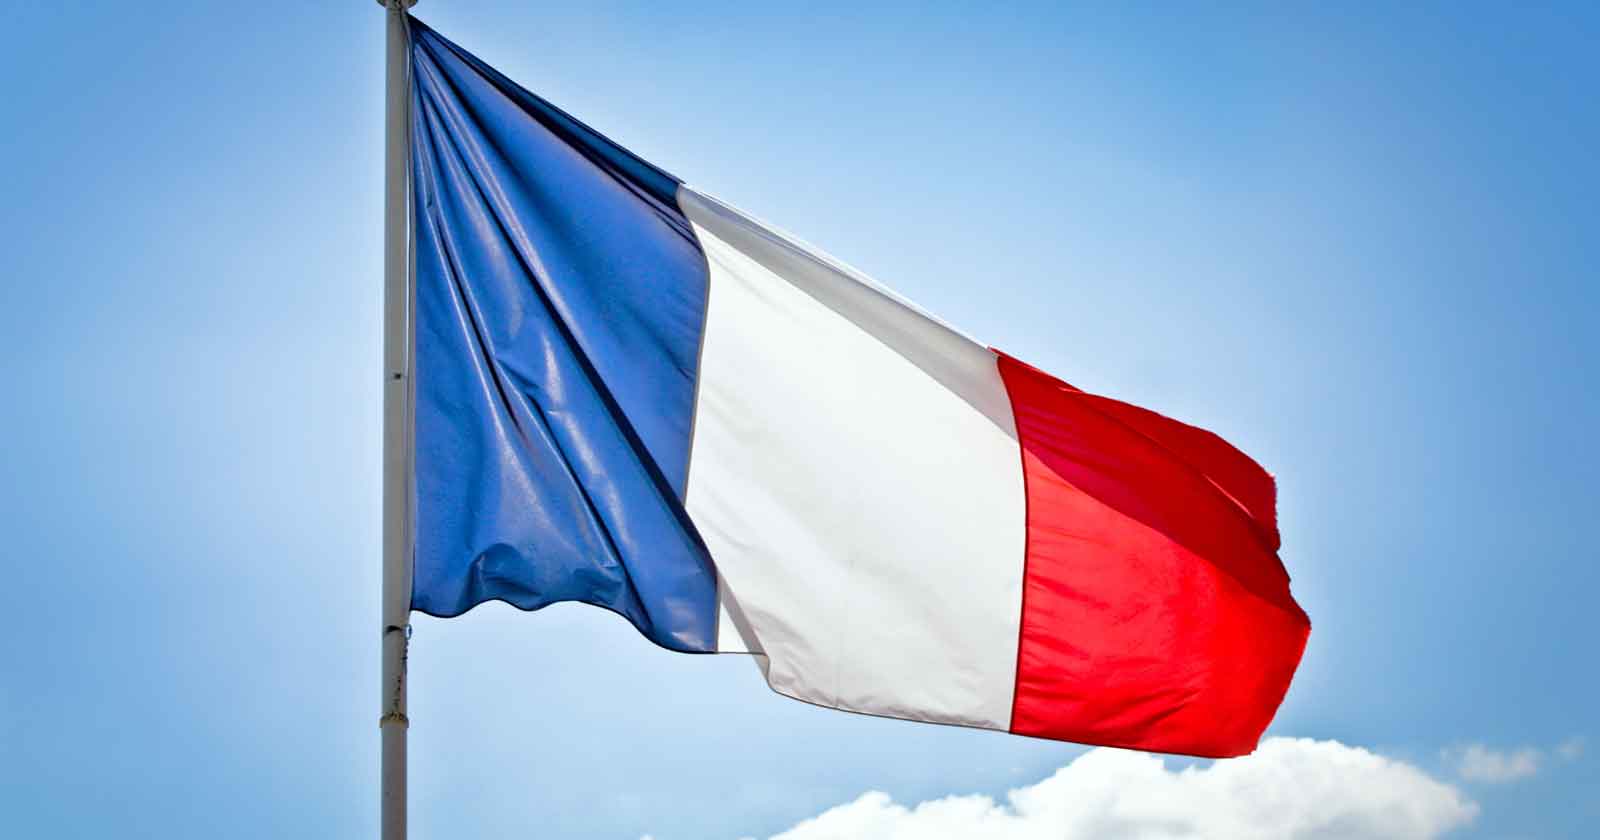 Image of a French flag